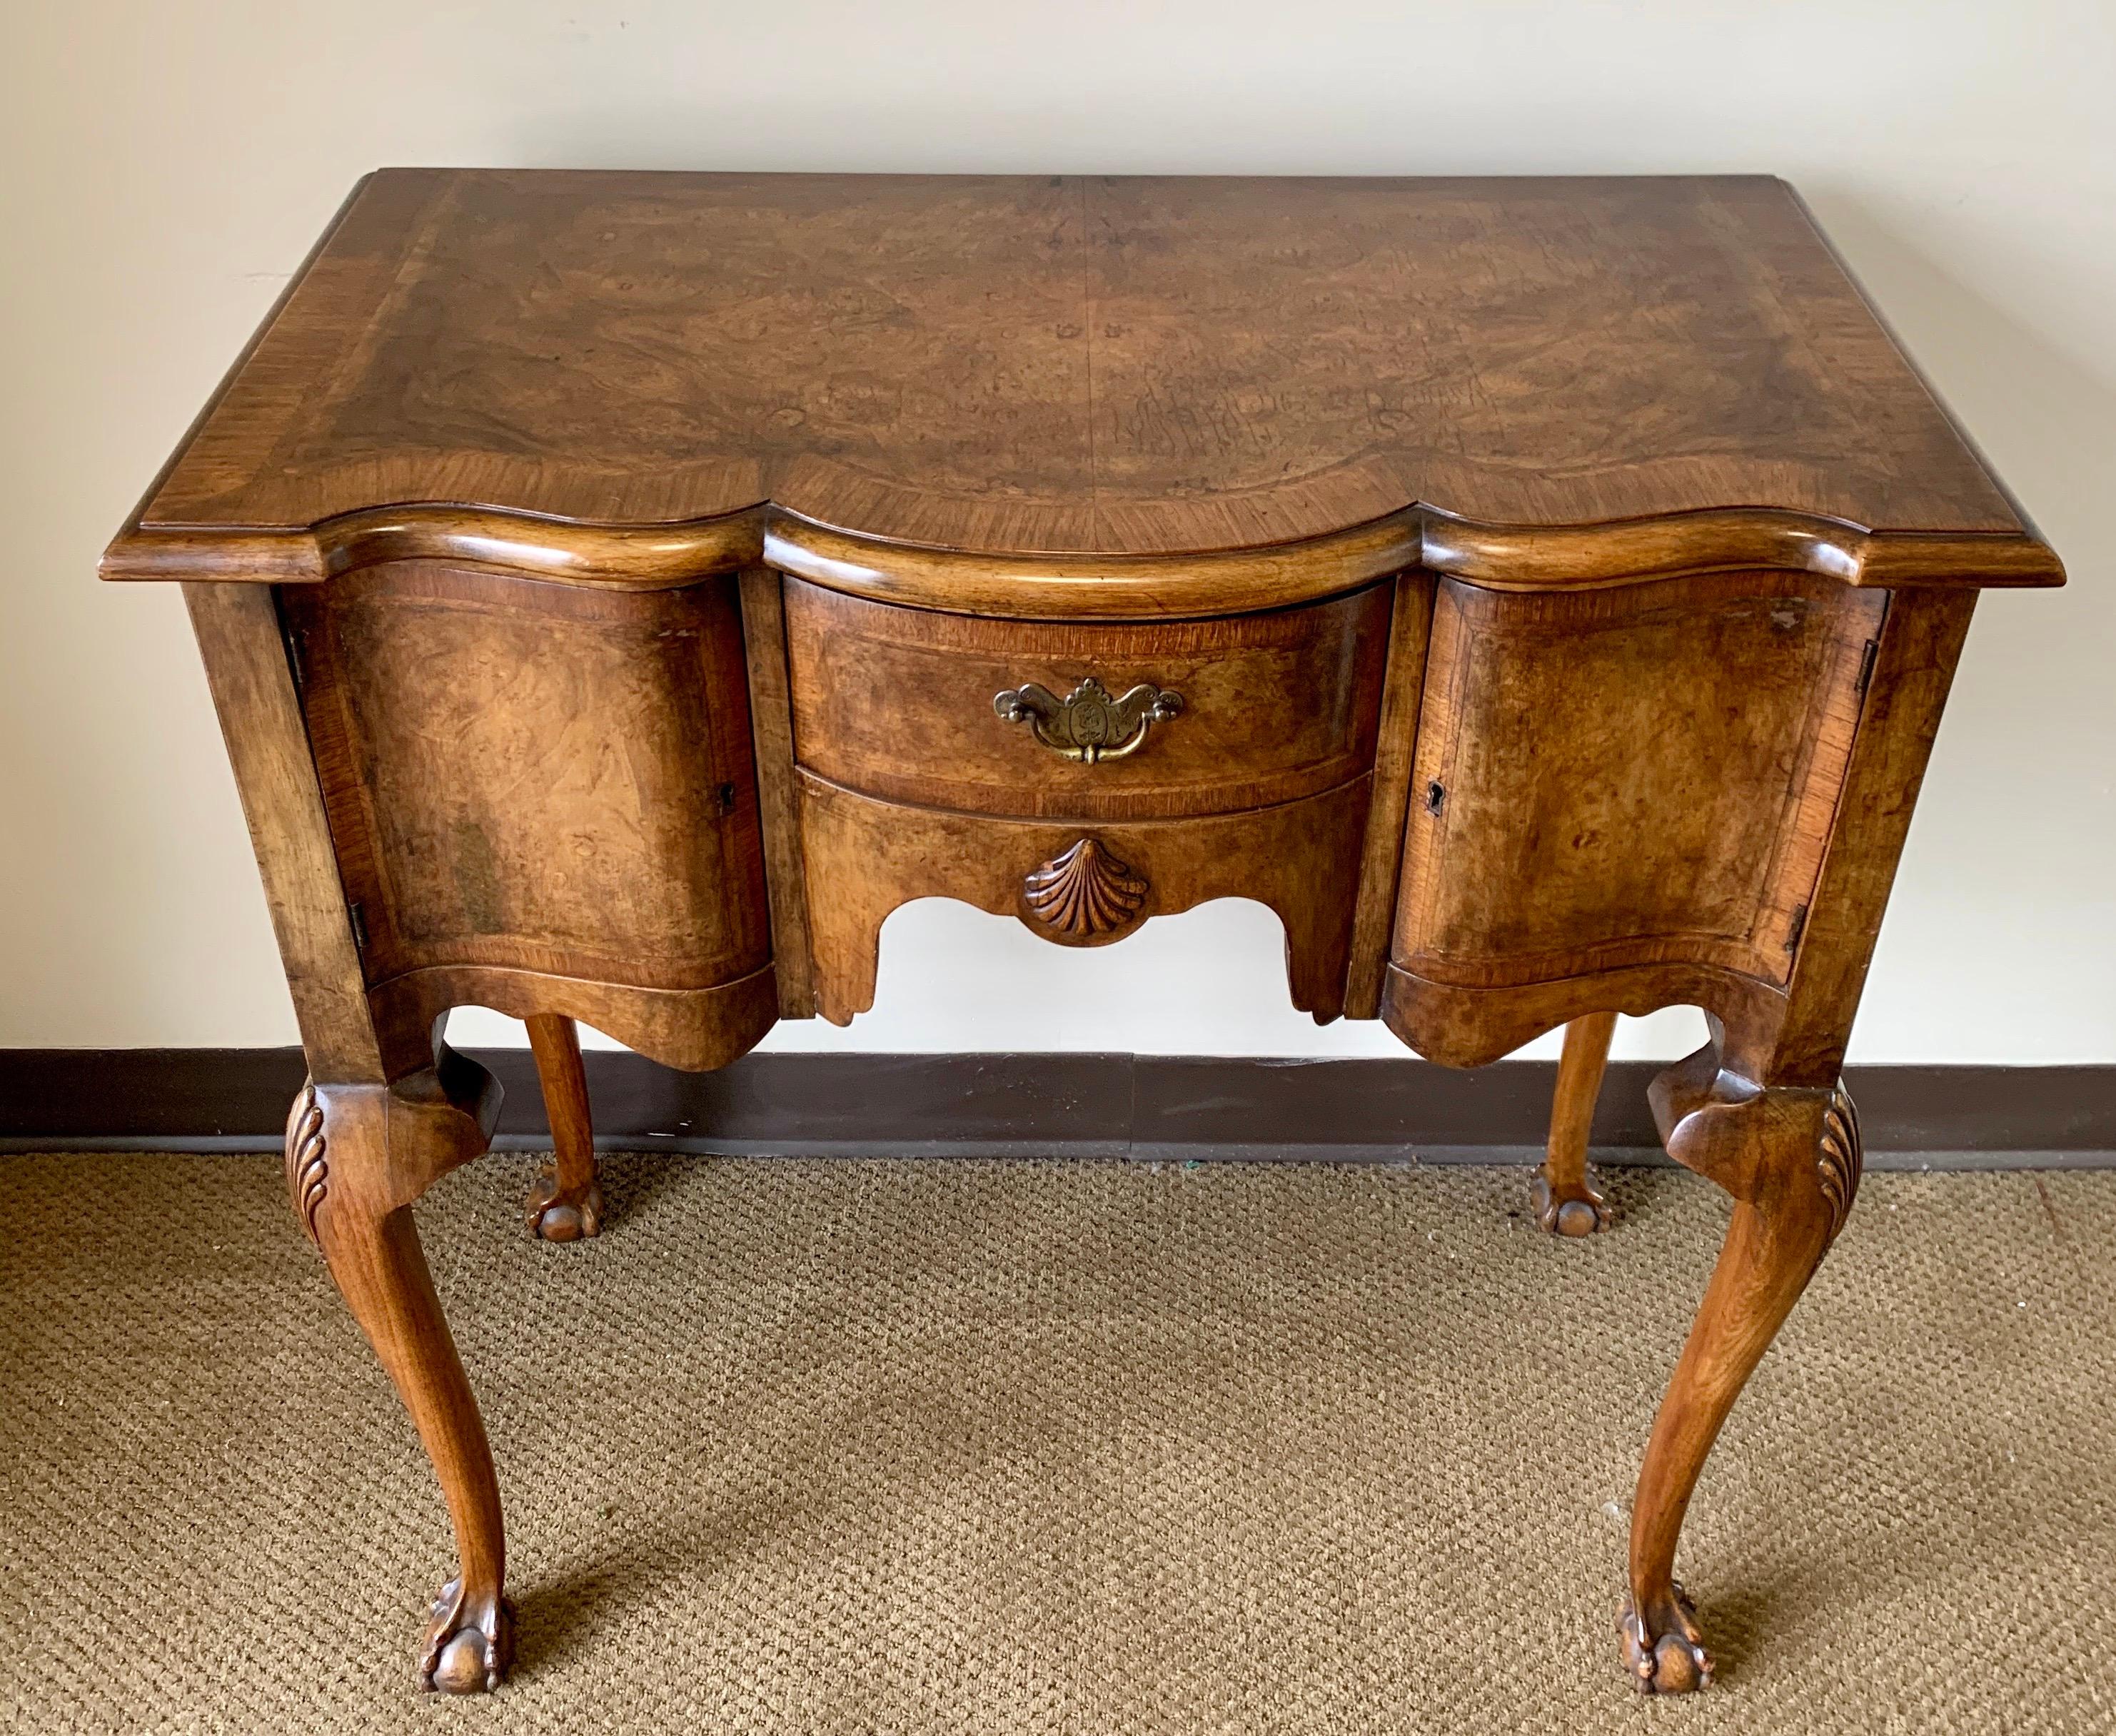 Coveted carved burled walnut console table The table has storage and key to lock which make the possibilities endless. Dry bar, console table, accent table, foyer piece - your call!